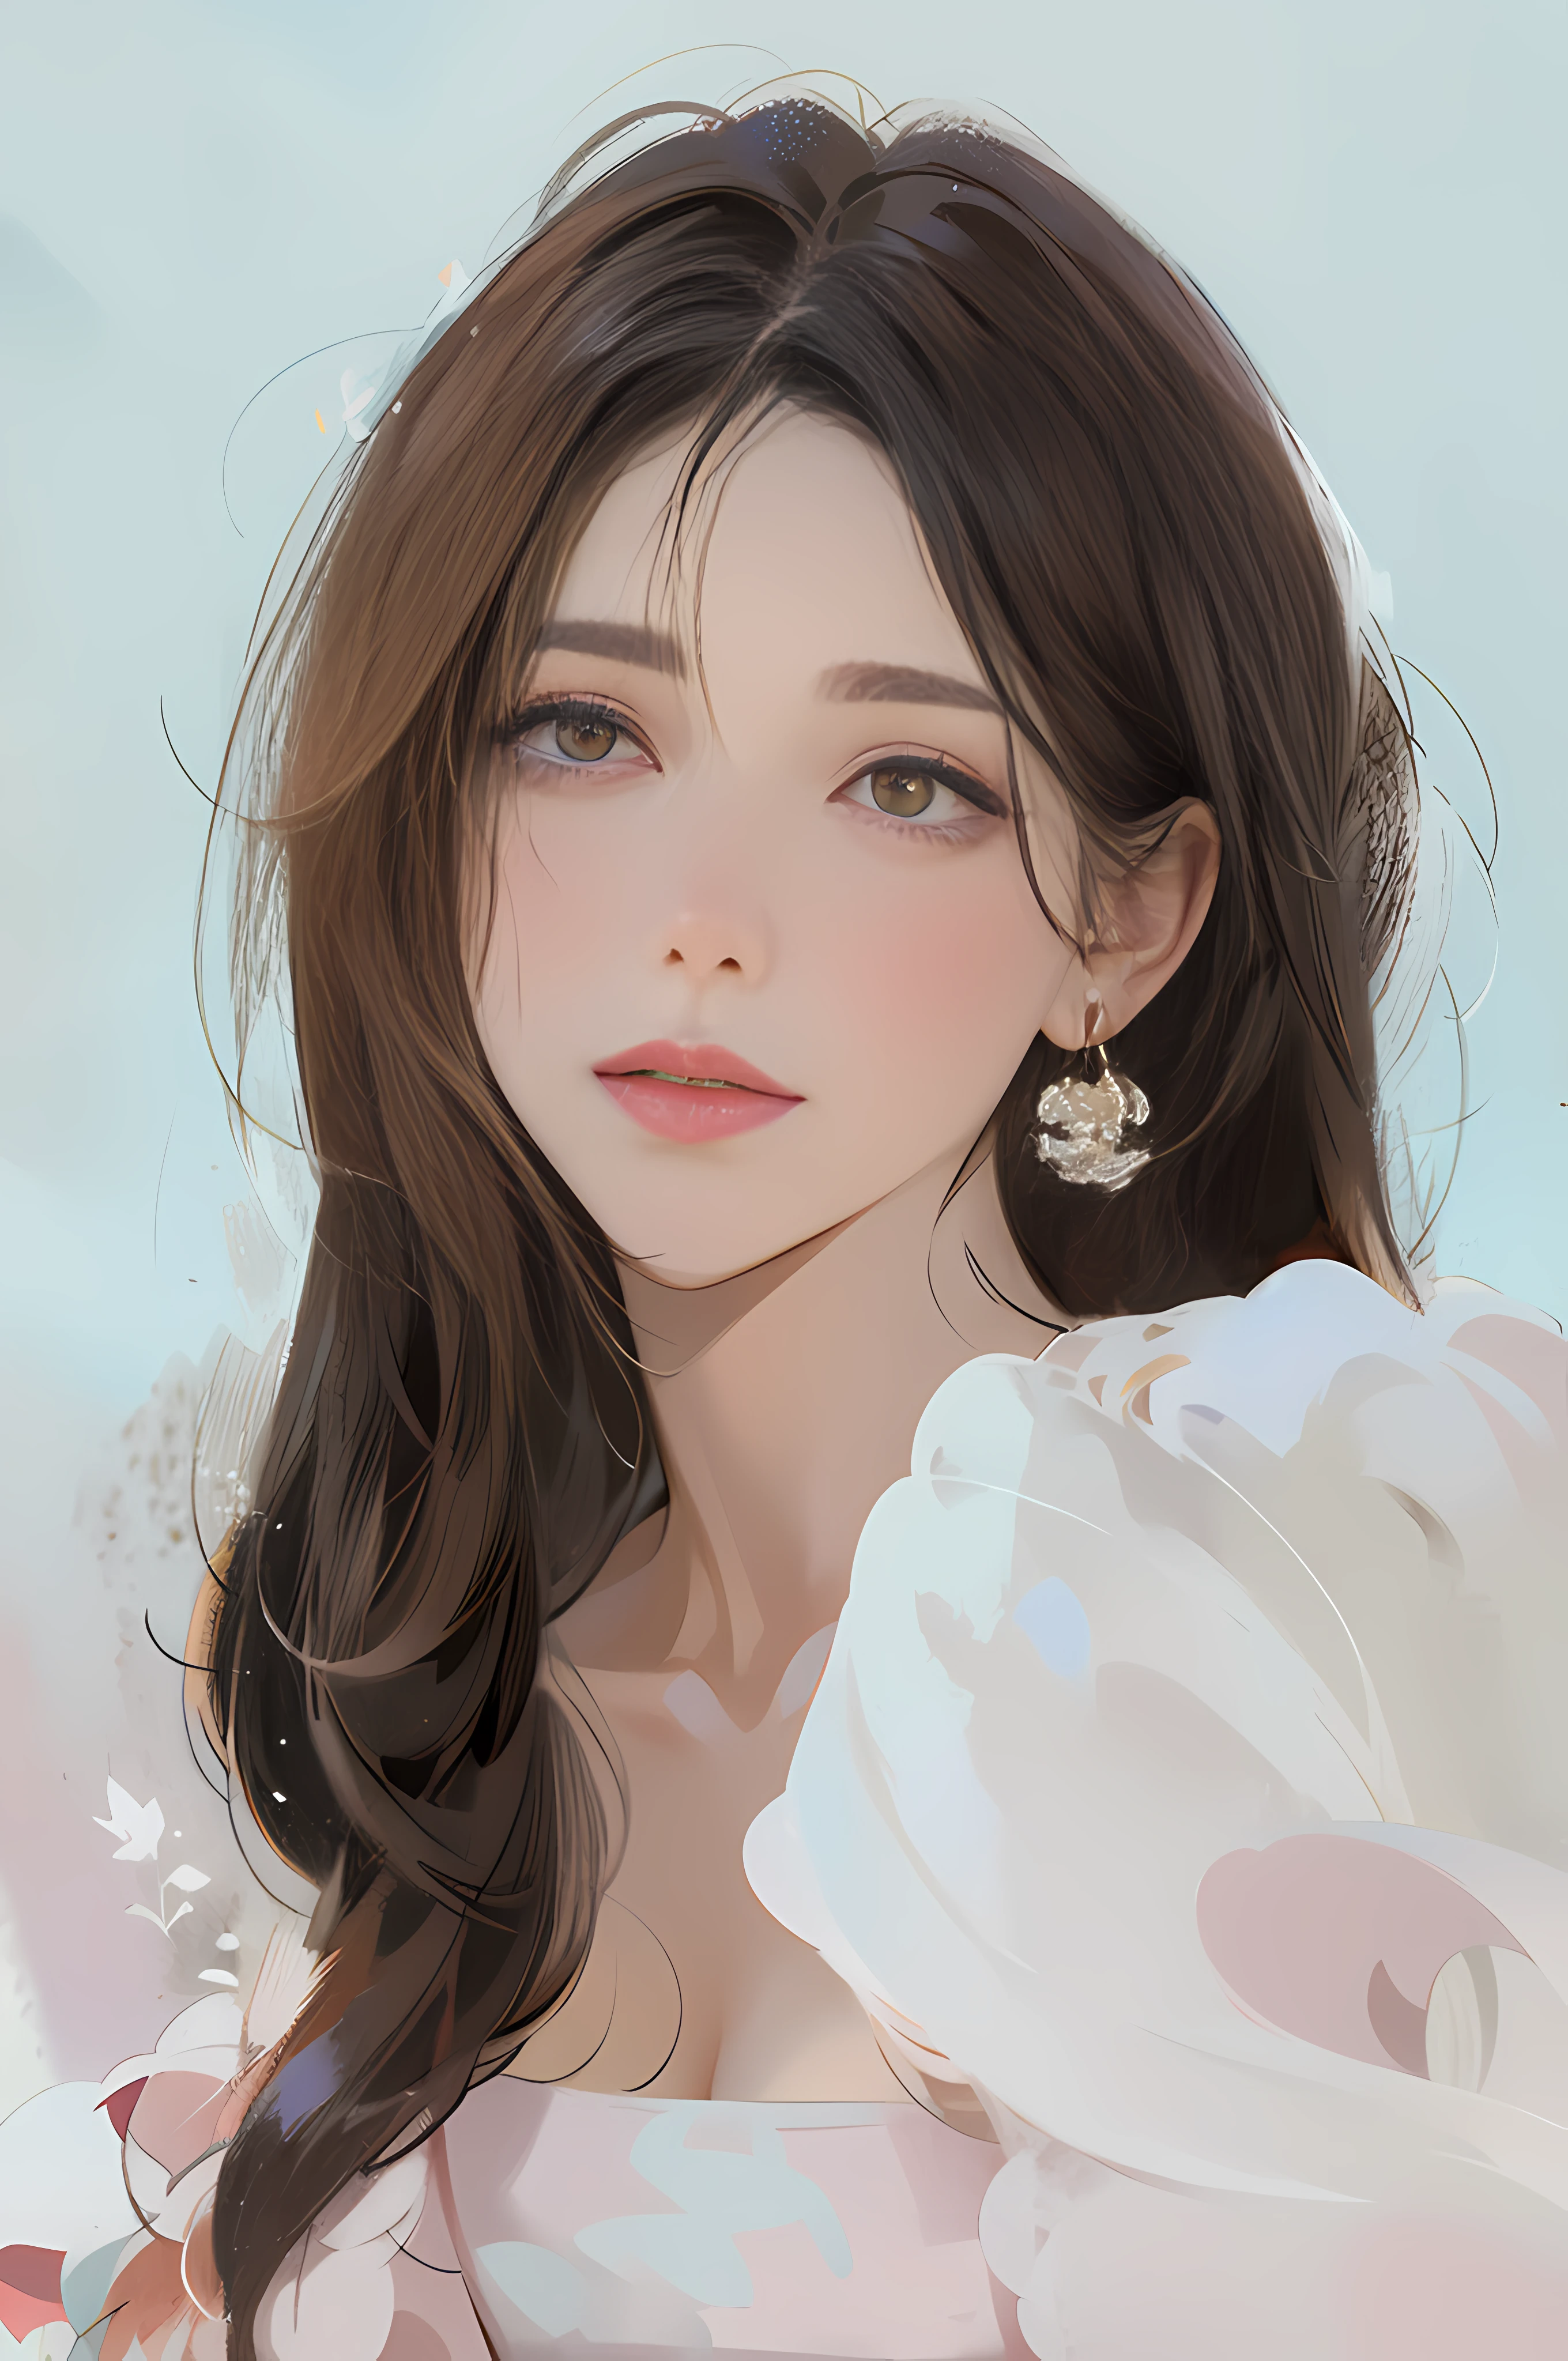 (nmasterpiece：1.2), Best quality,Unity 8k wallpaper, ultra -detailed, (s fractal art: 1.2), japan animation, CG, 1girls，a close up of a woman with long hair wearing a pink dress, Delicate makeup,Bright eye，ear ring，Clear jade earrings，Smile with，Parting lips，white teeth